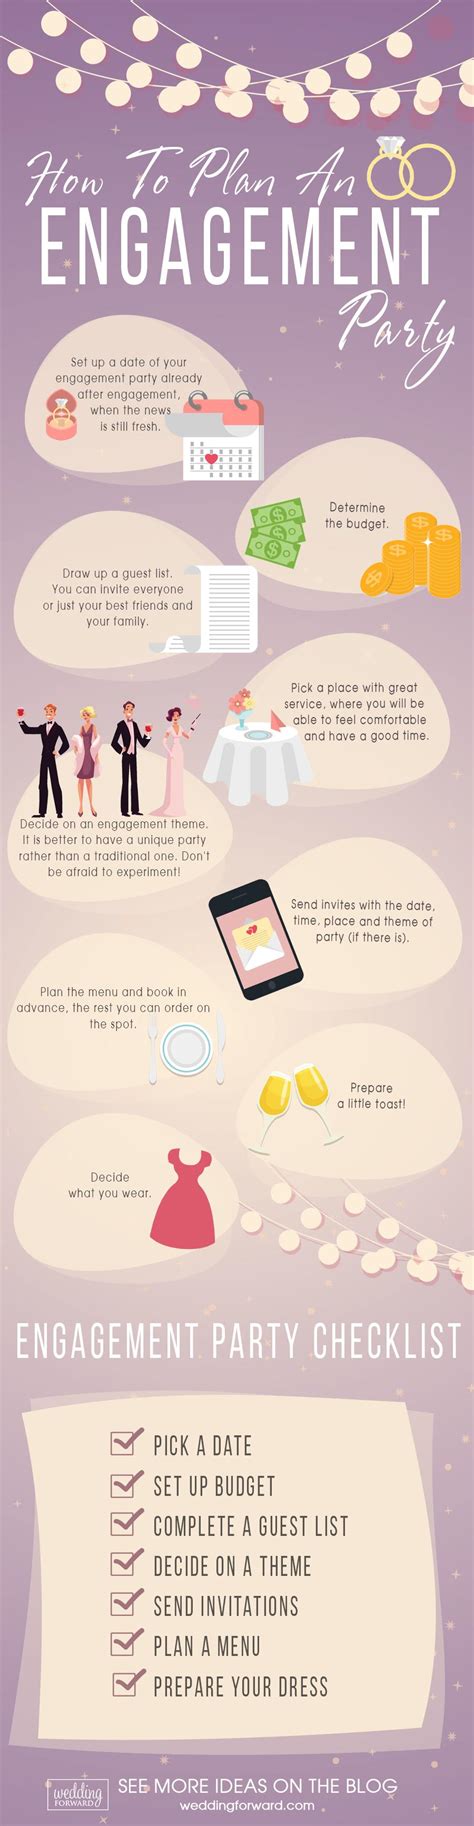 10 Creative And Classy Engagement Party Ideas That Wow